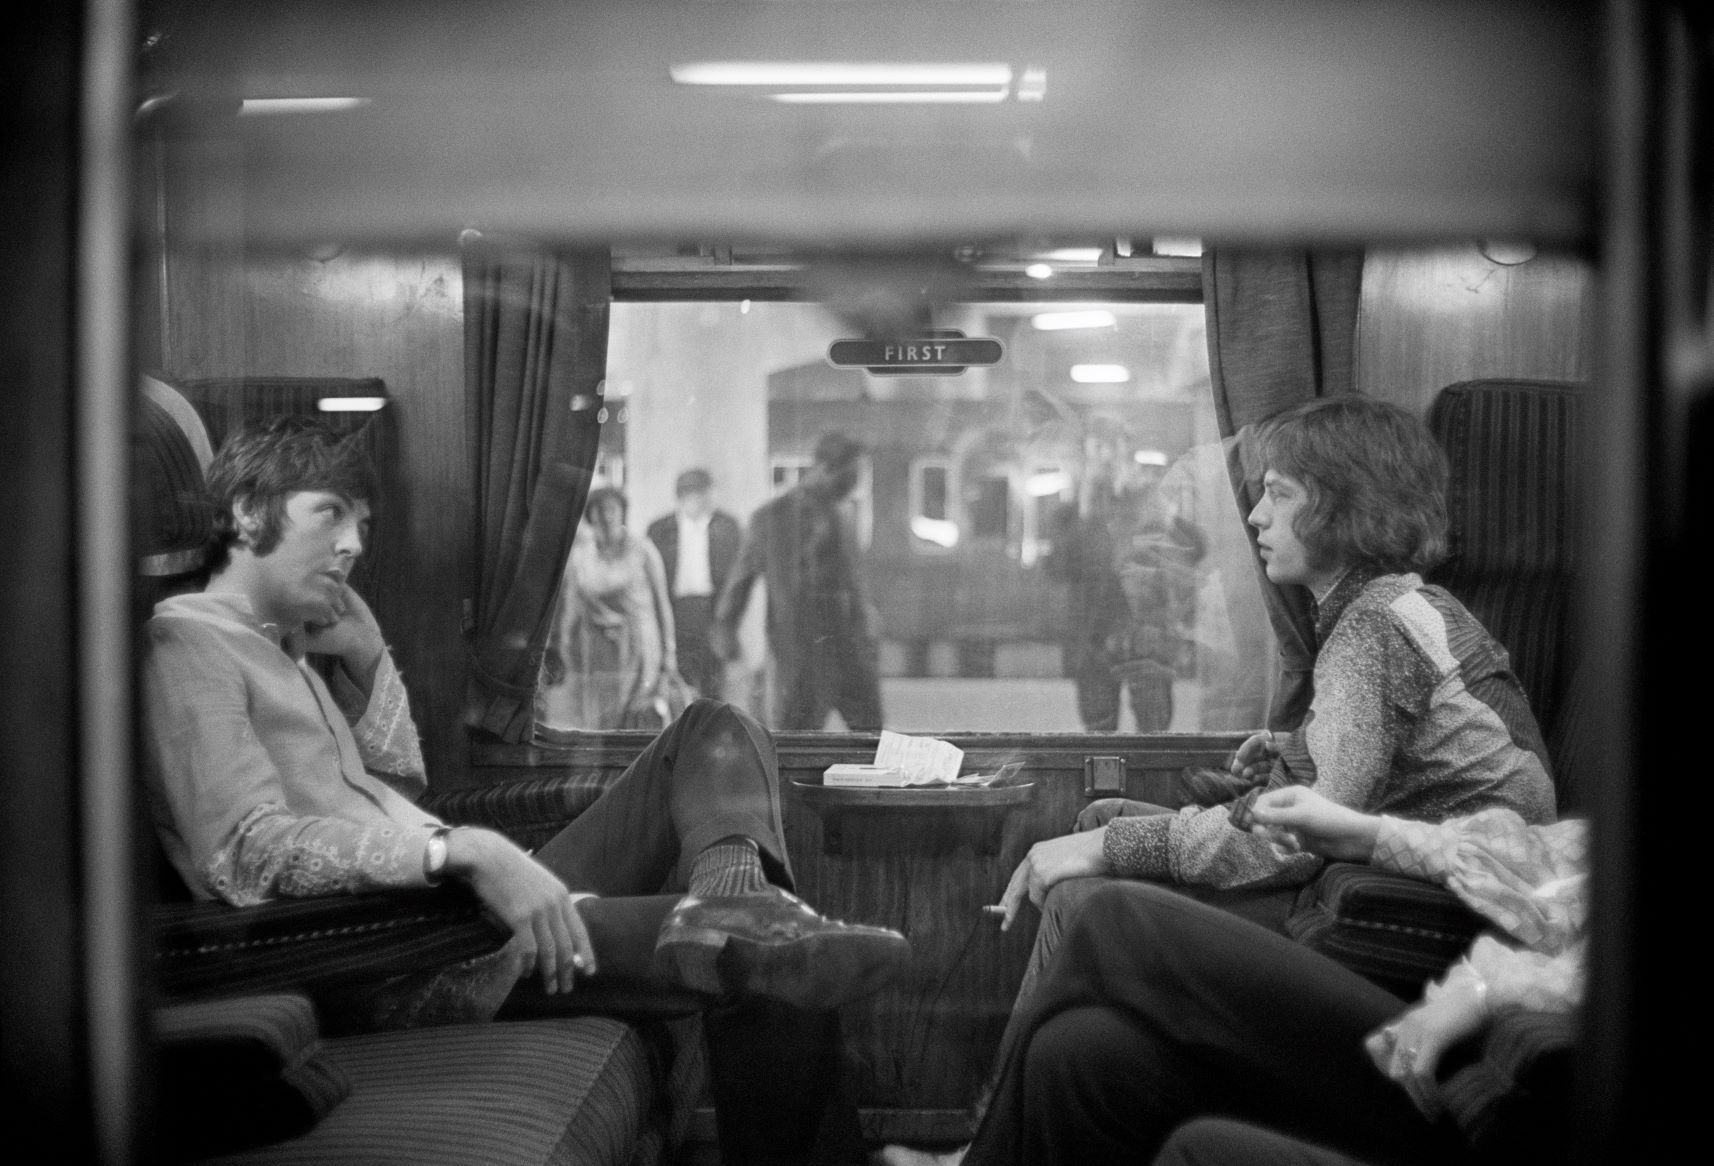 The Beatles’ Paul McCartney and The Rolling Stones’ Mick Jagger in a train car